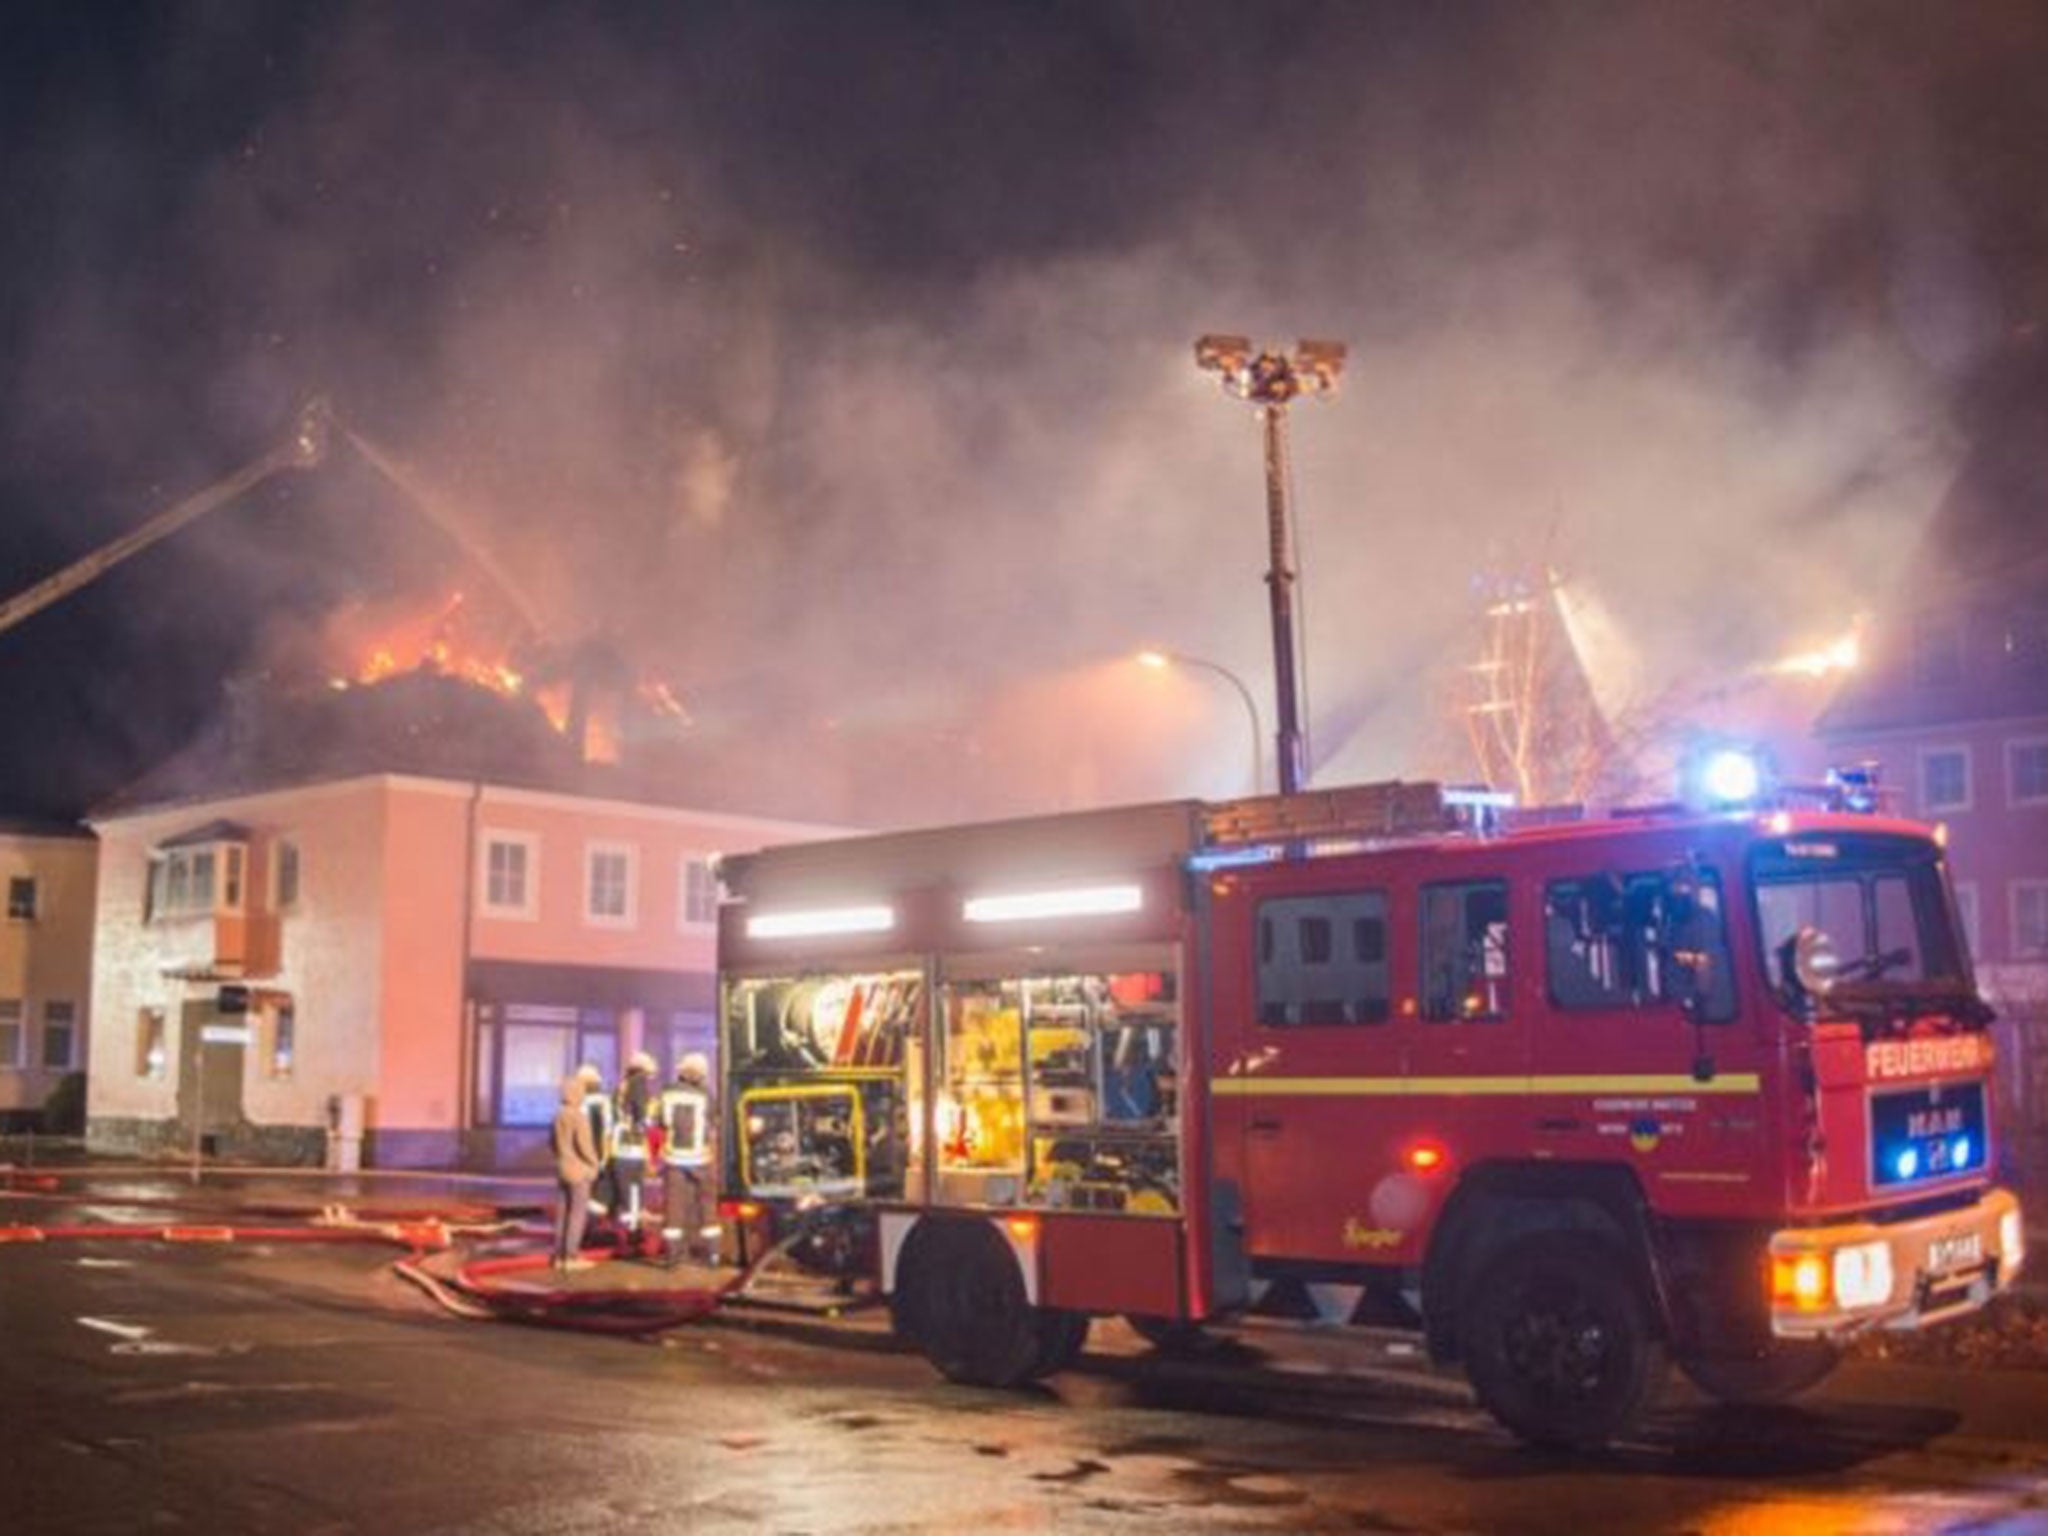 Firefighters tackle a fire in a planned refugee home in Bautzen, Germany, 21 February, 2016